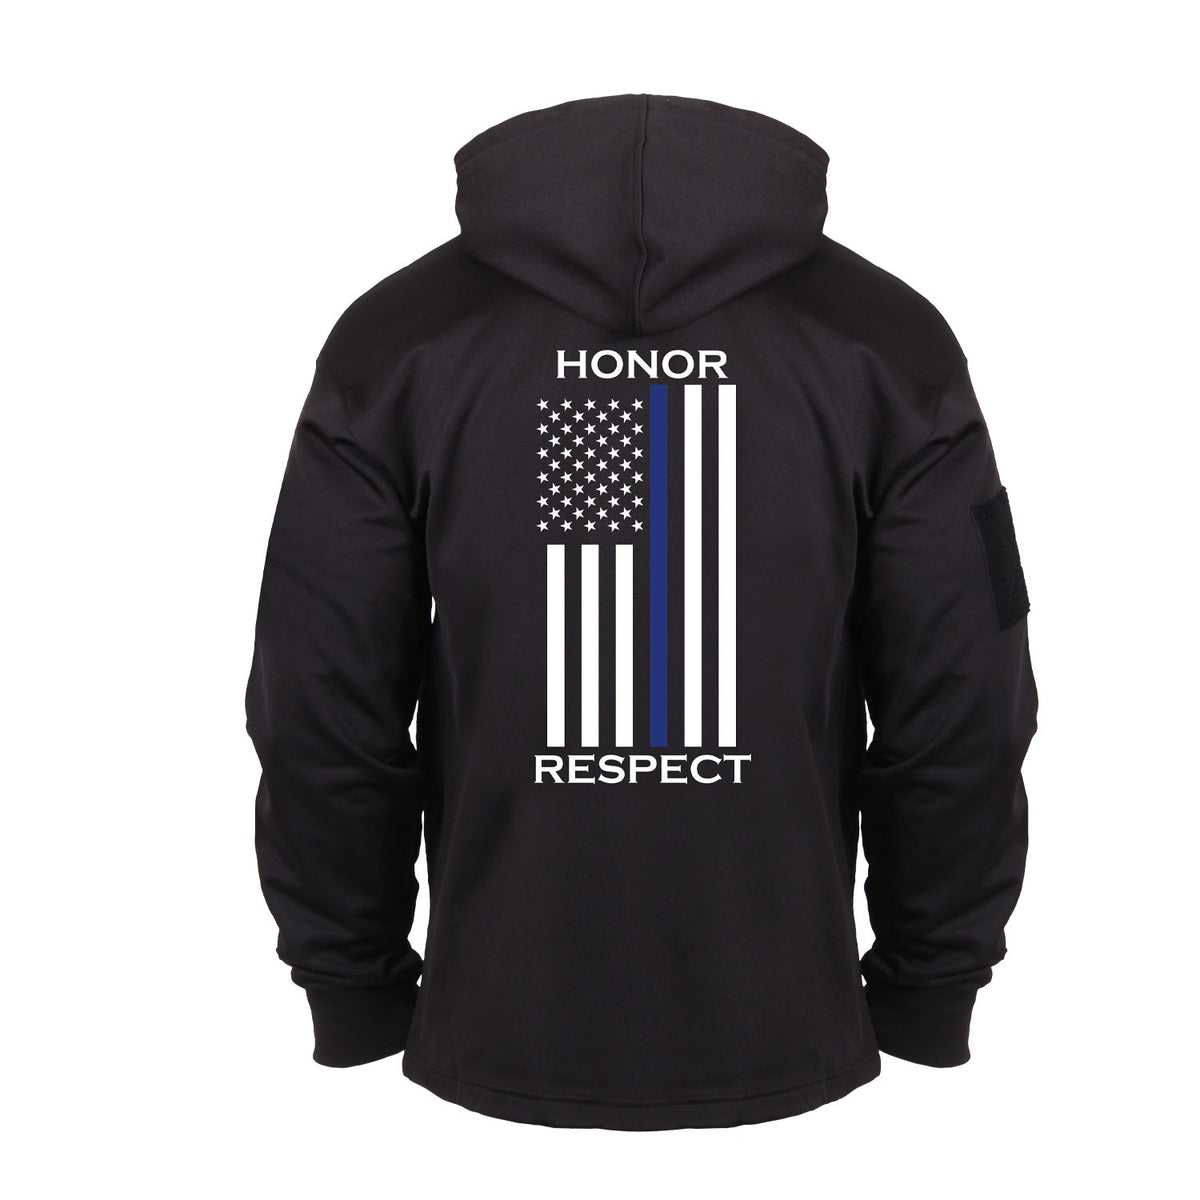 Rothco Honor and Respect Thin Blue Line Concealed Carry Hoodie - Black